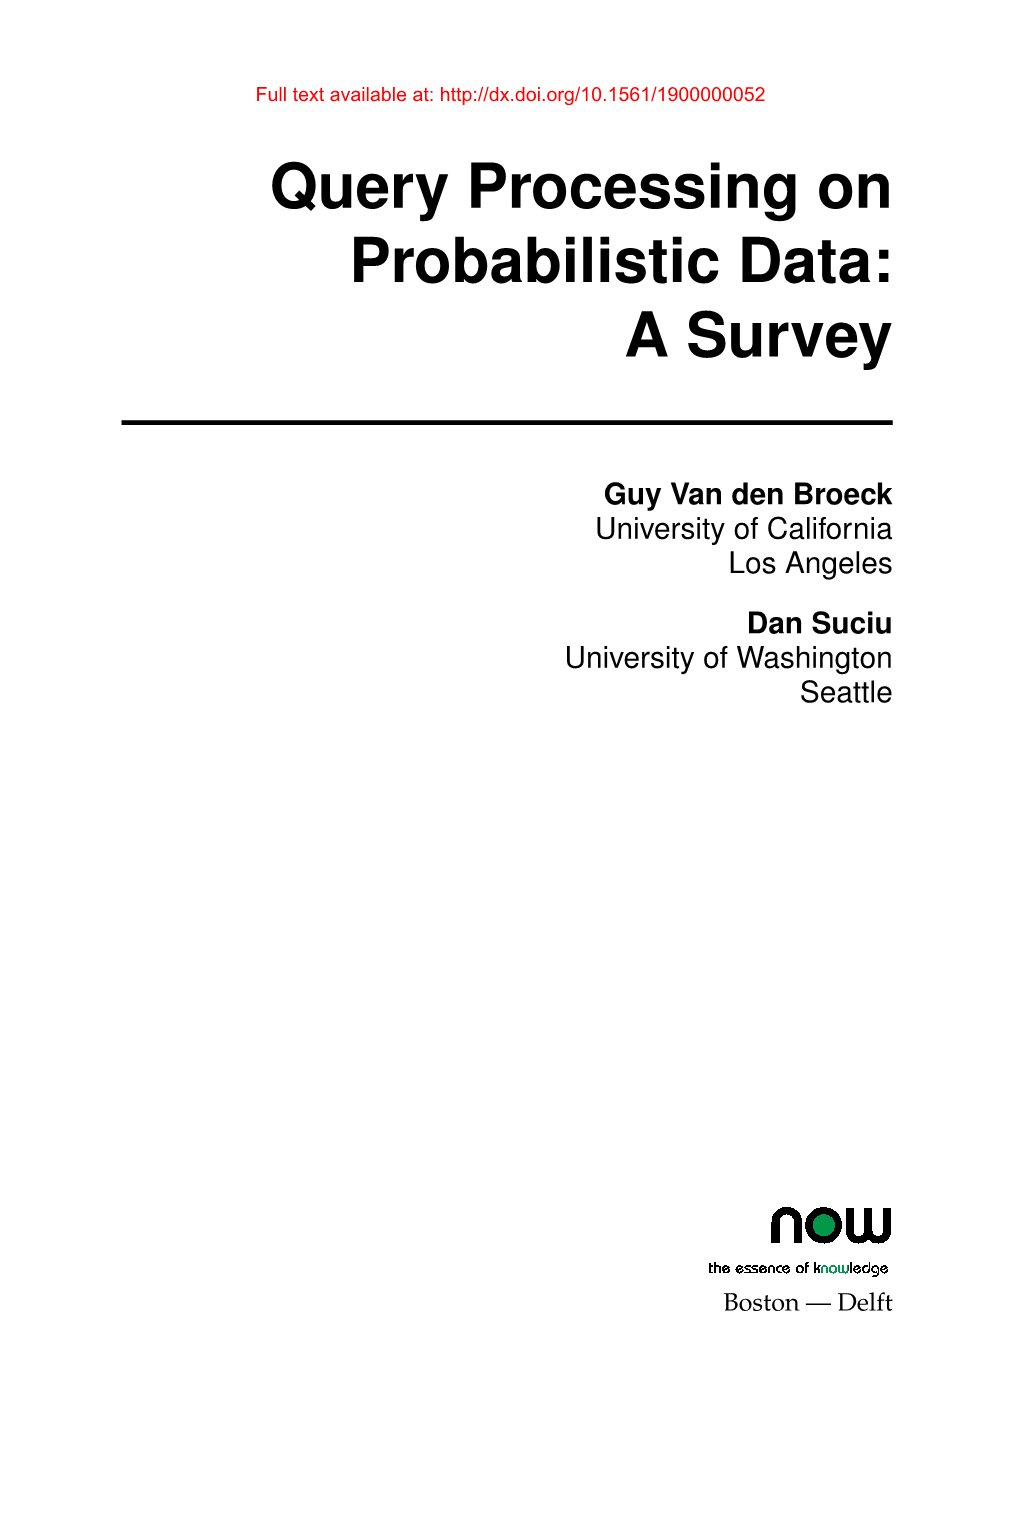 Query Processing on Probabilistic Data: a Survey